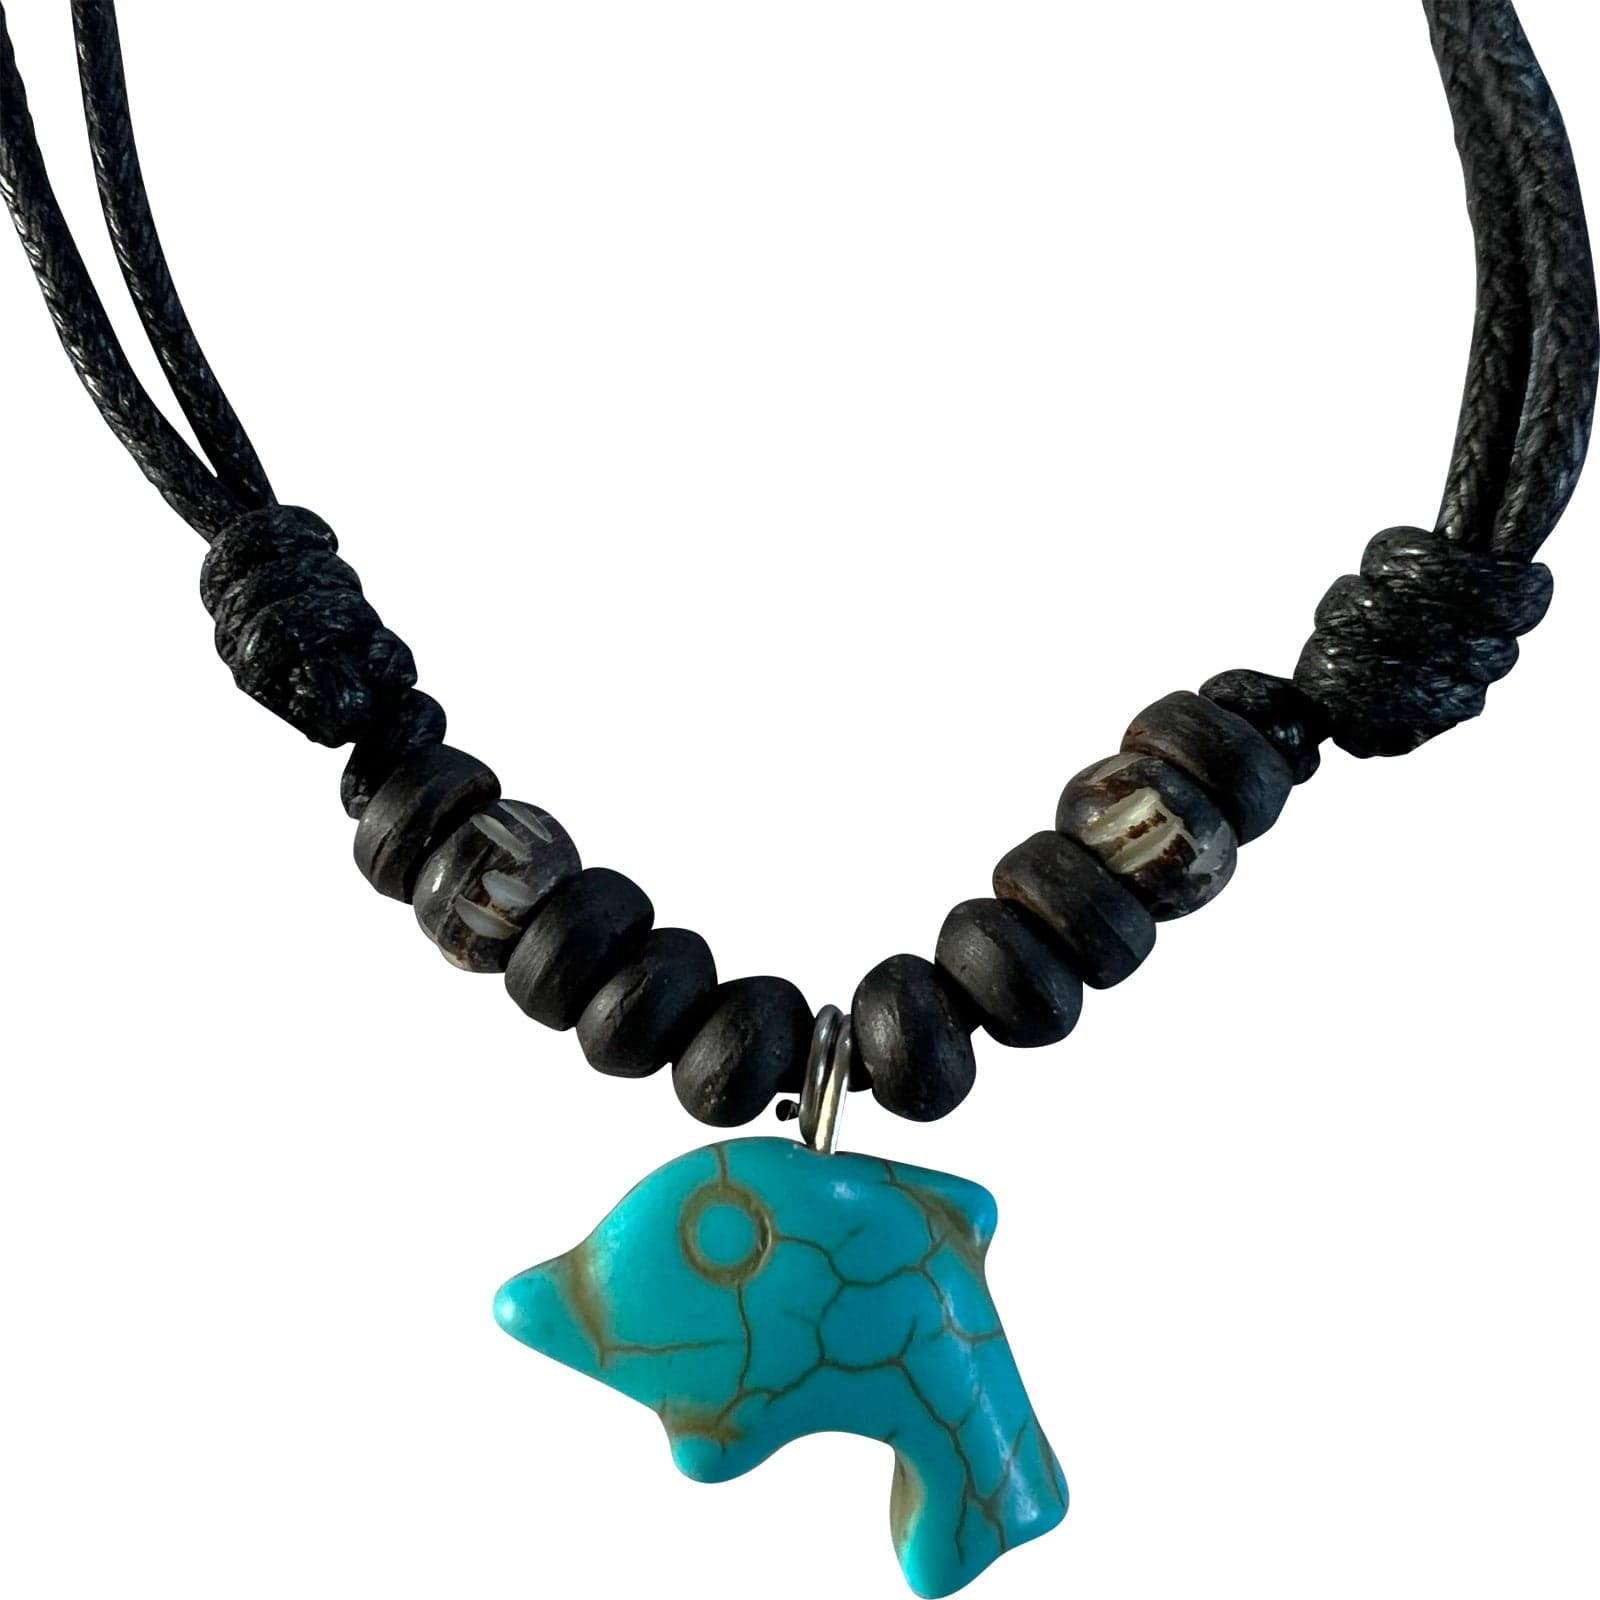 Turquoise Dolphin Pendant Necklace Black Cord Chain Mens Womens Kids Jewellery